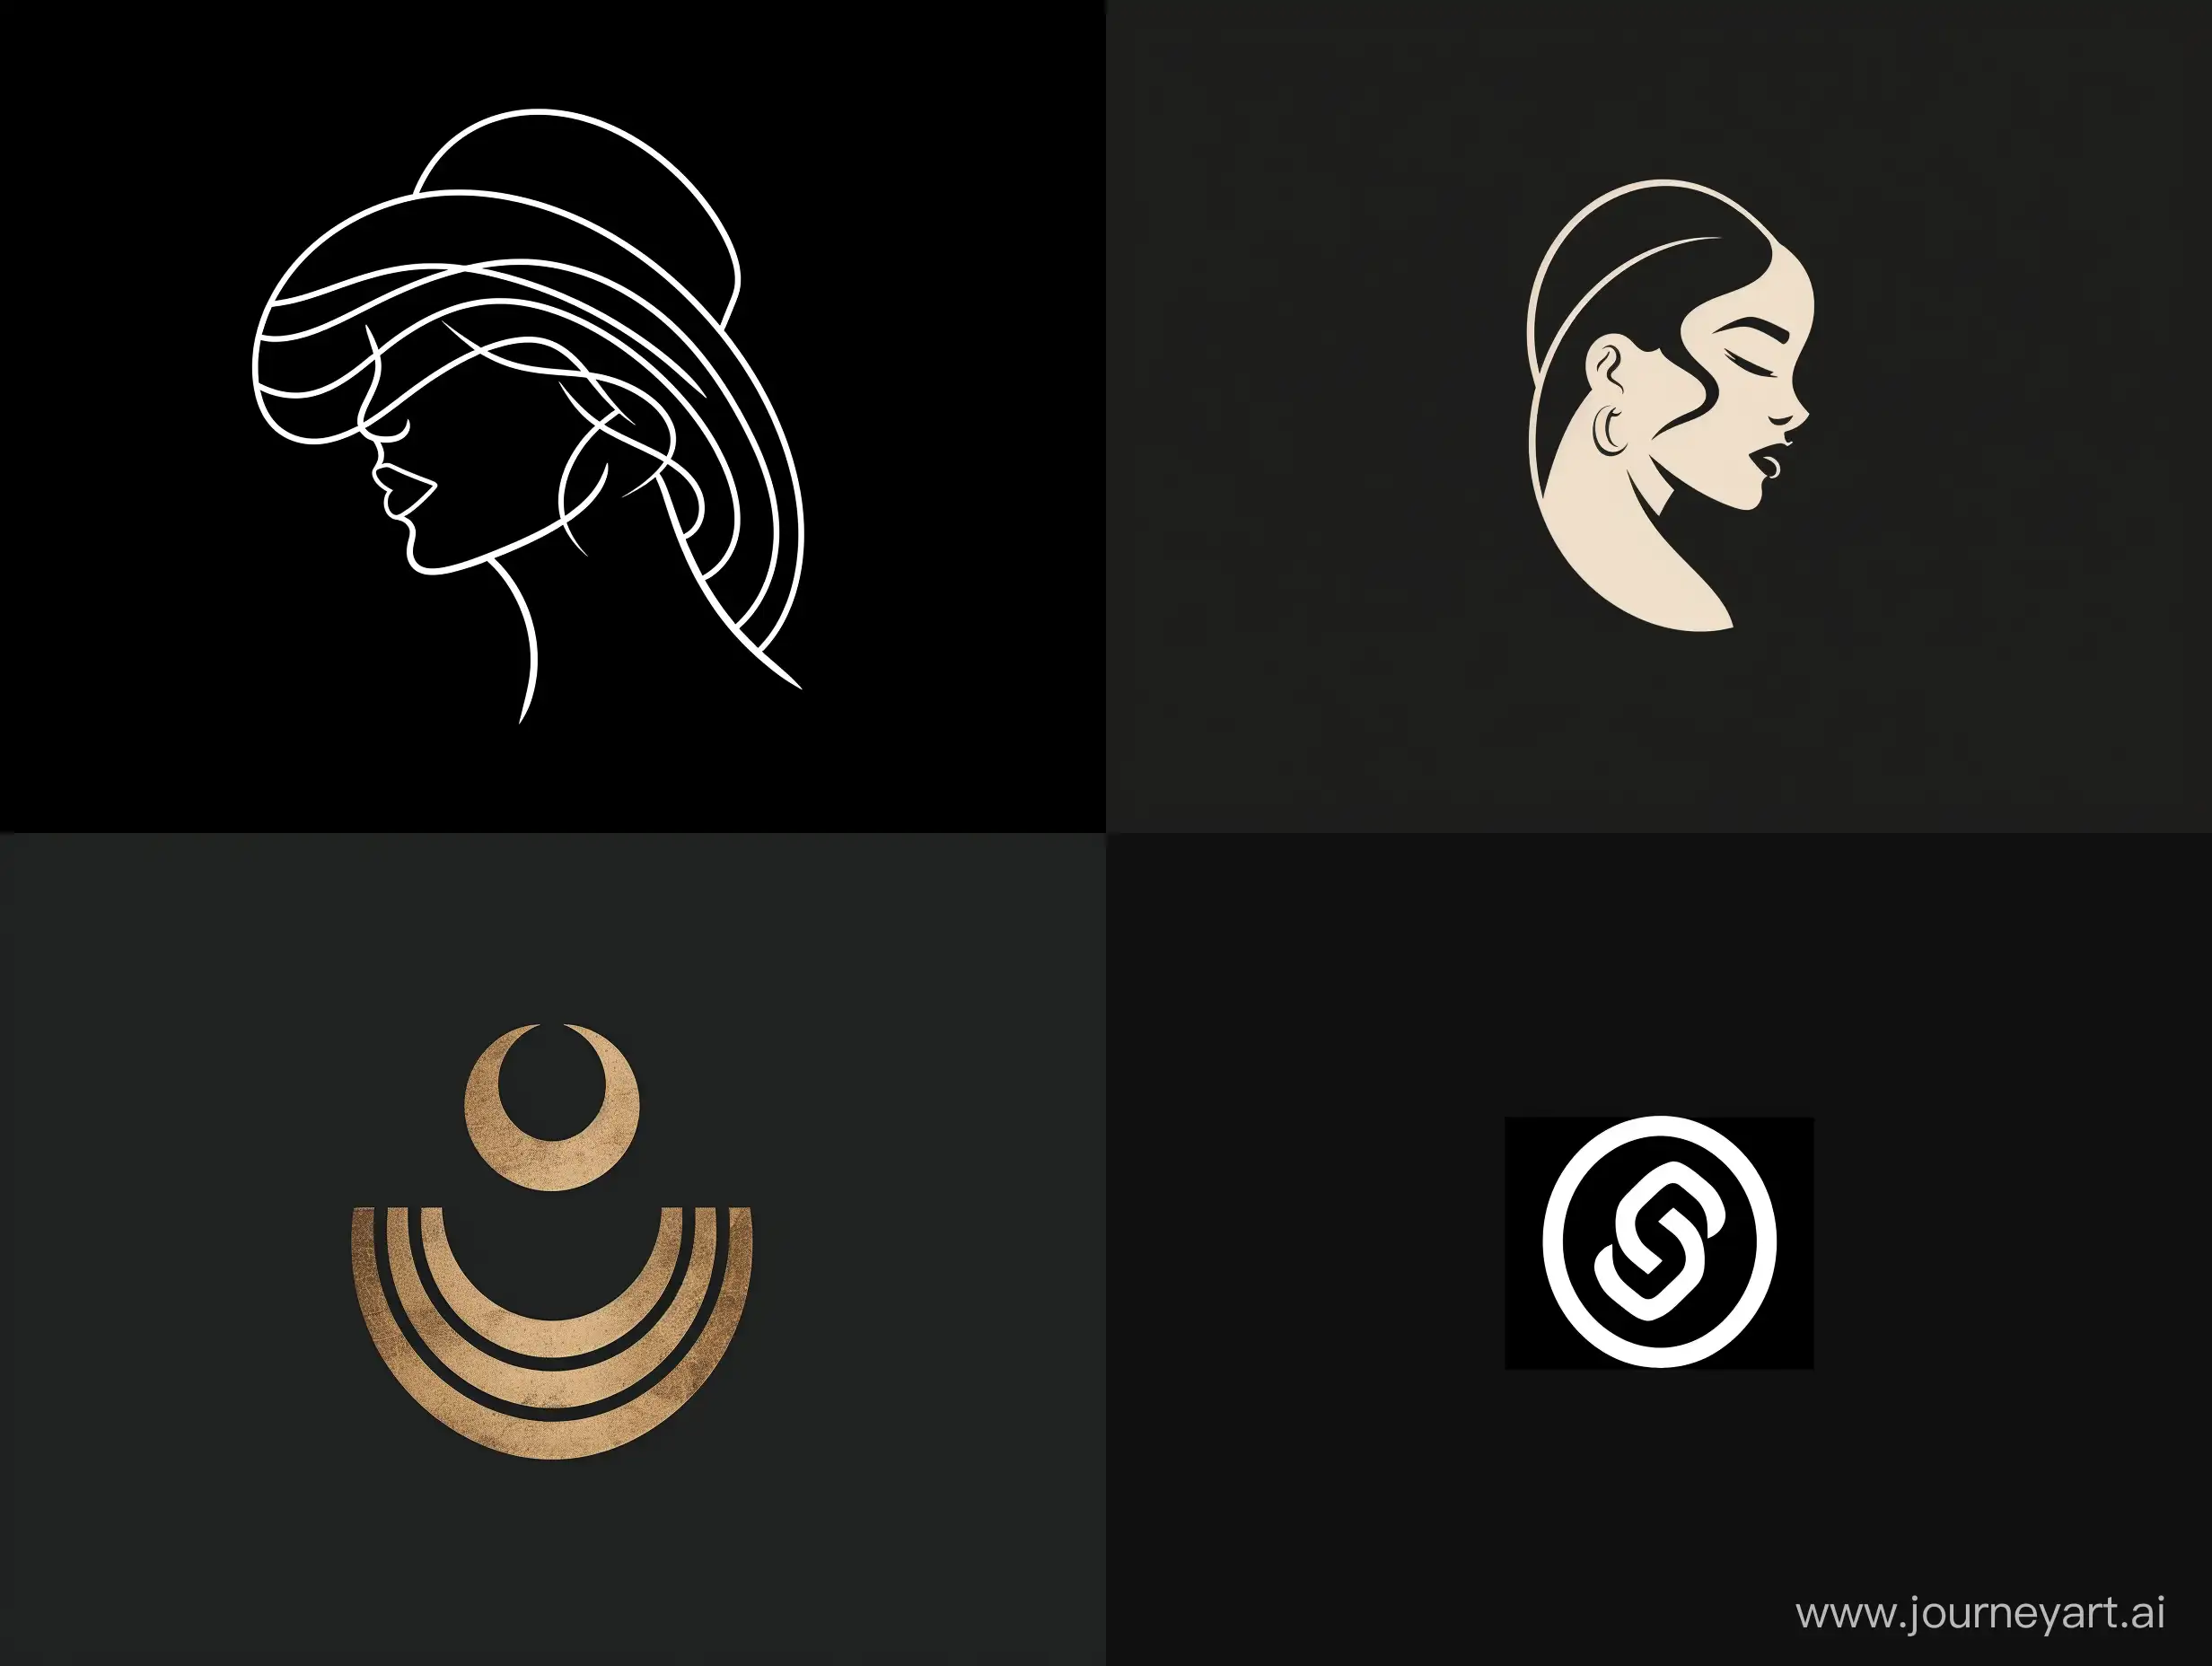 Iconic-Minimal-Fashion-Logo-Design-in-the-Style-of-Saul-Bass